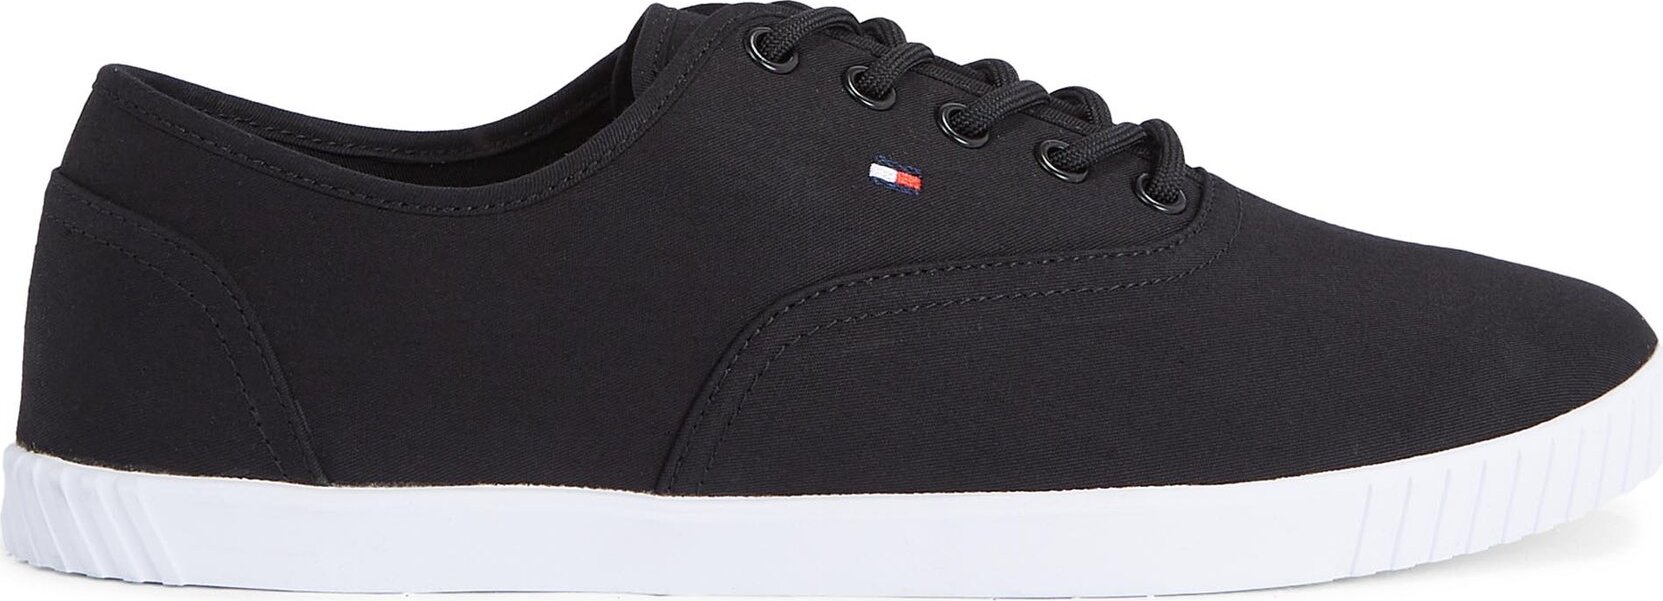 Tenisky Tommy Hilfiger Canvas Lace Up Sneaker FW0FW07805 Black BDS